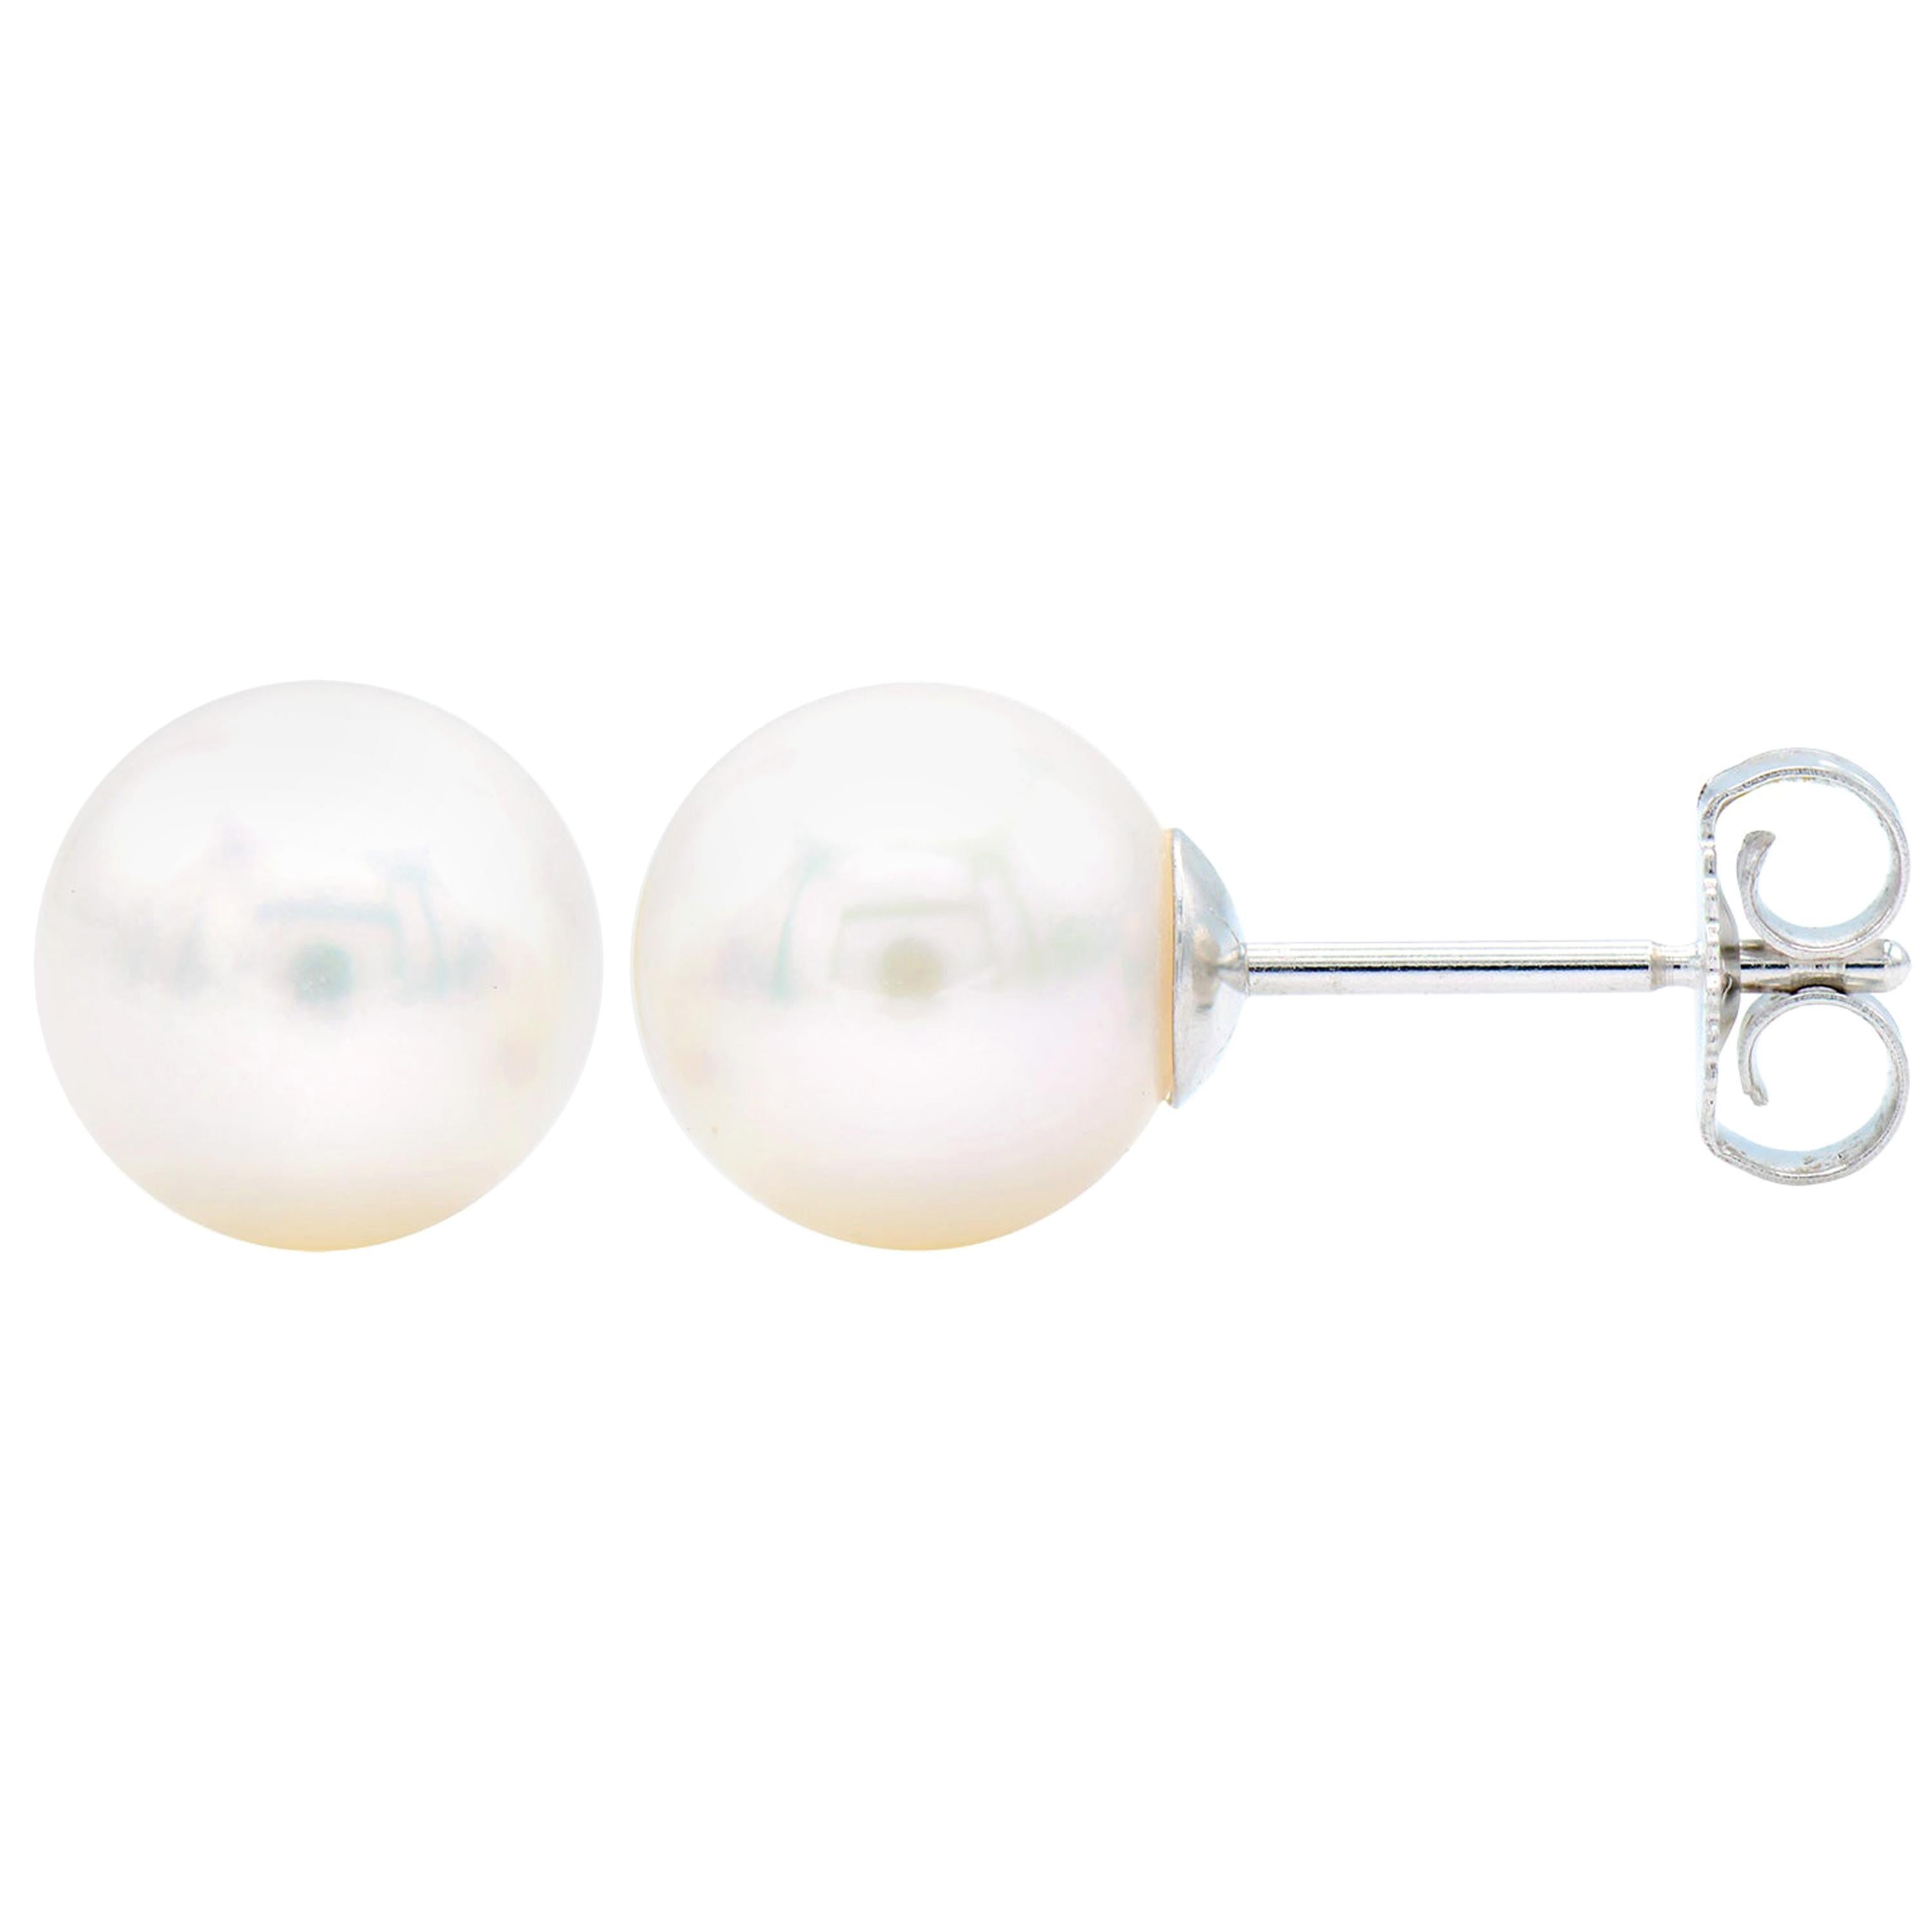 7-7.5mm Cultured Pearl Stud Earrings with 14 Karat White Gold Posts and Backs For Sale